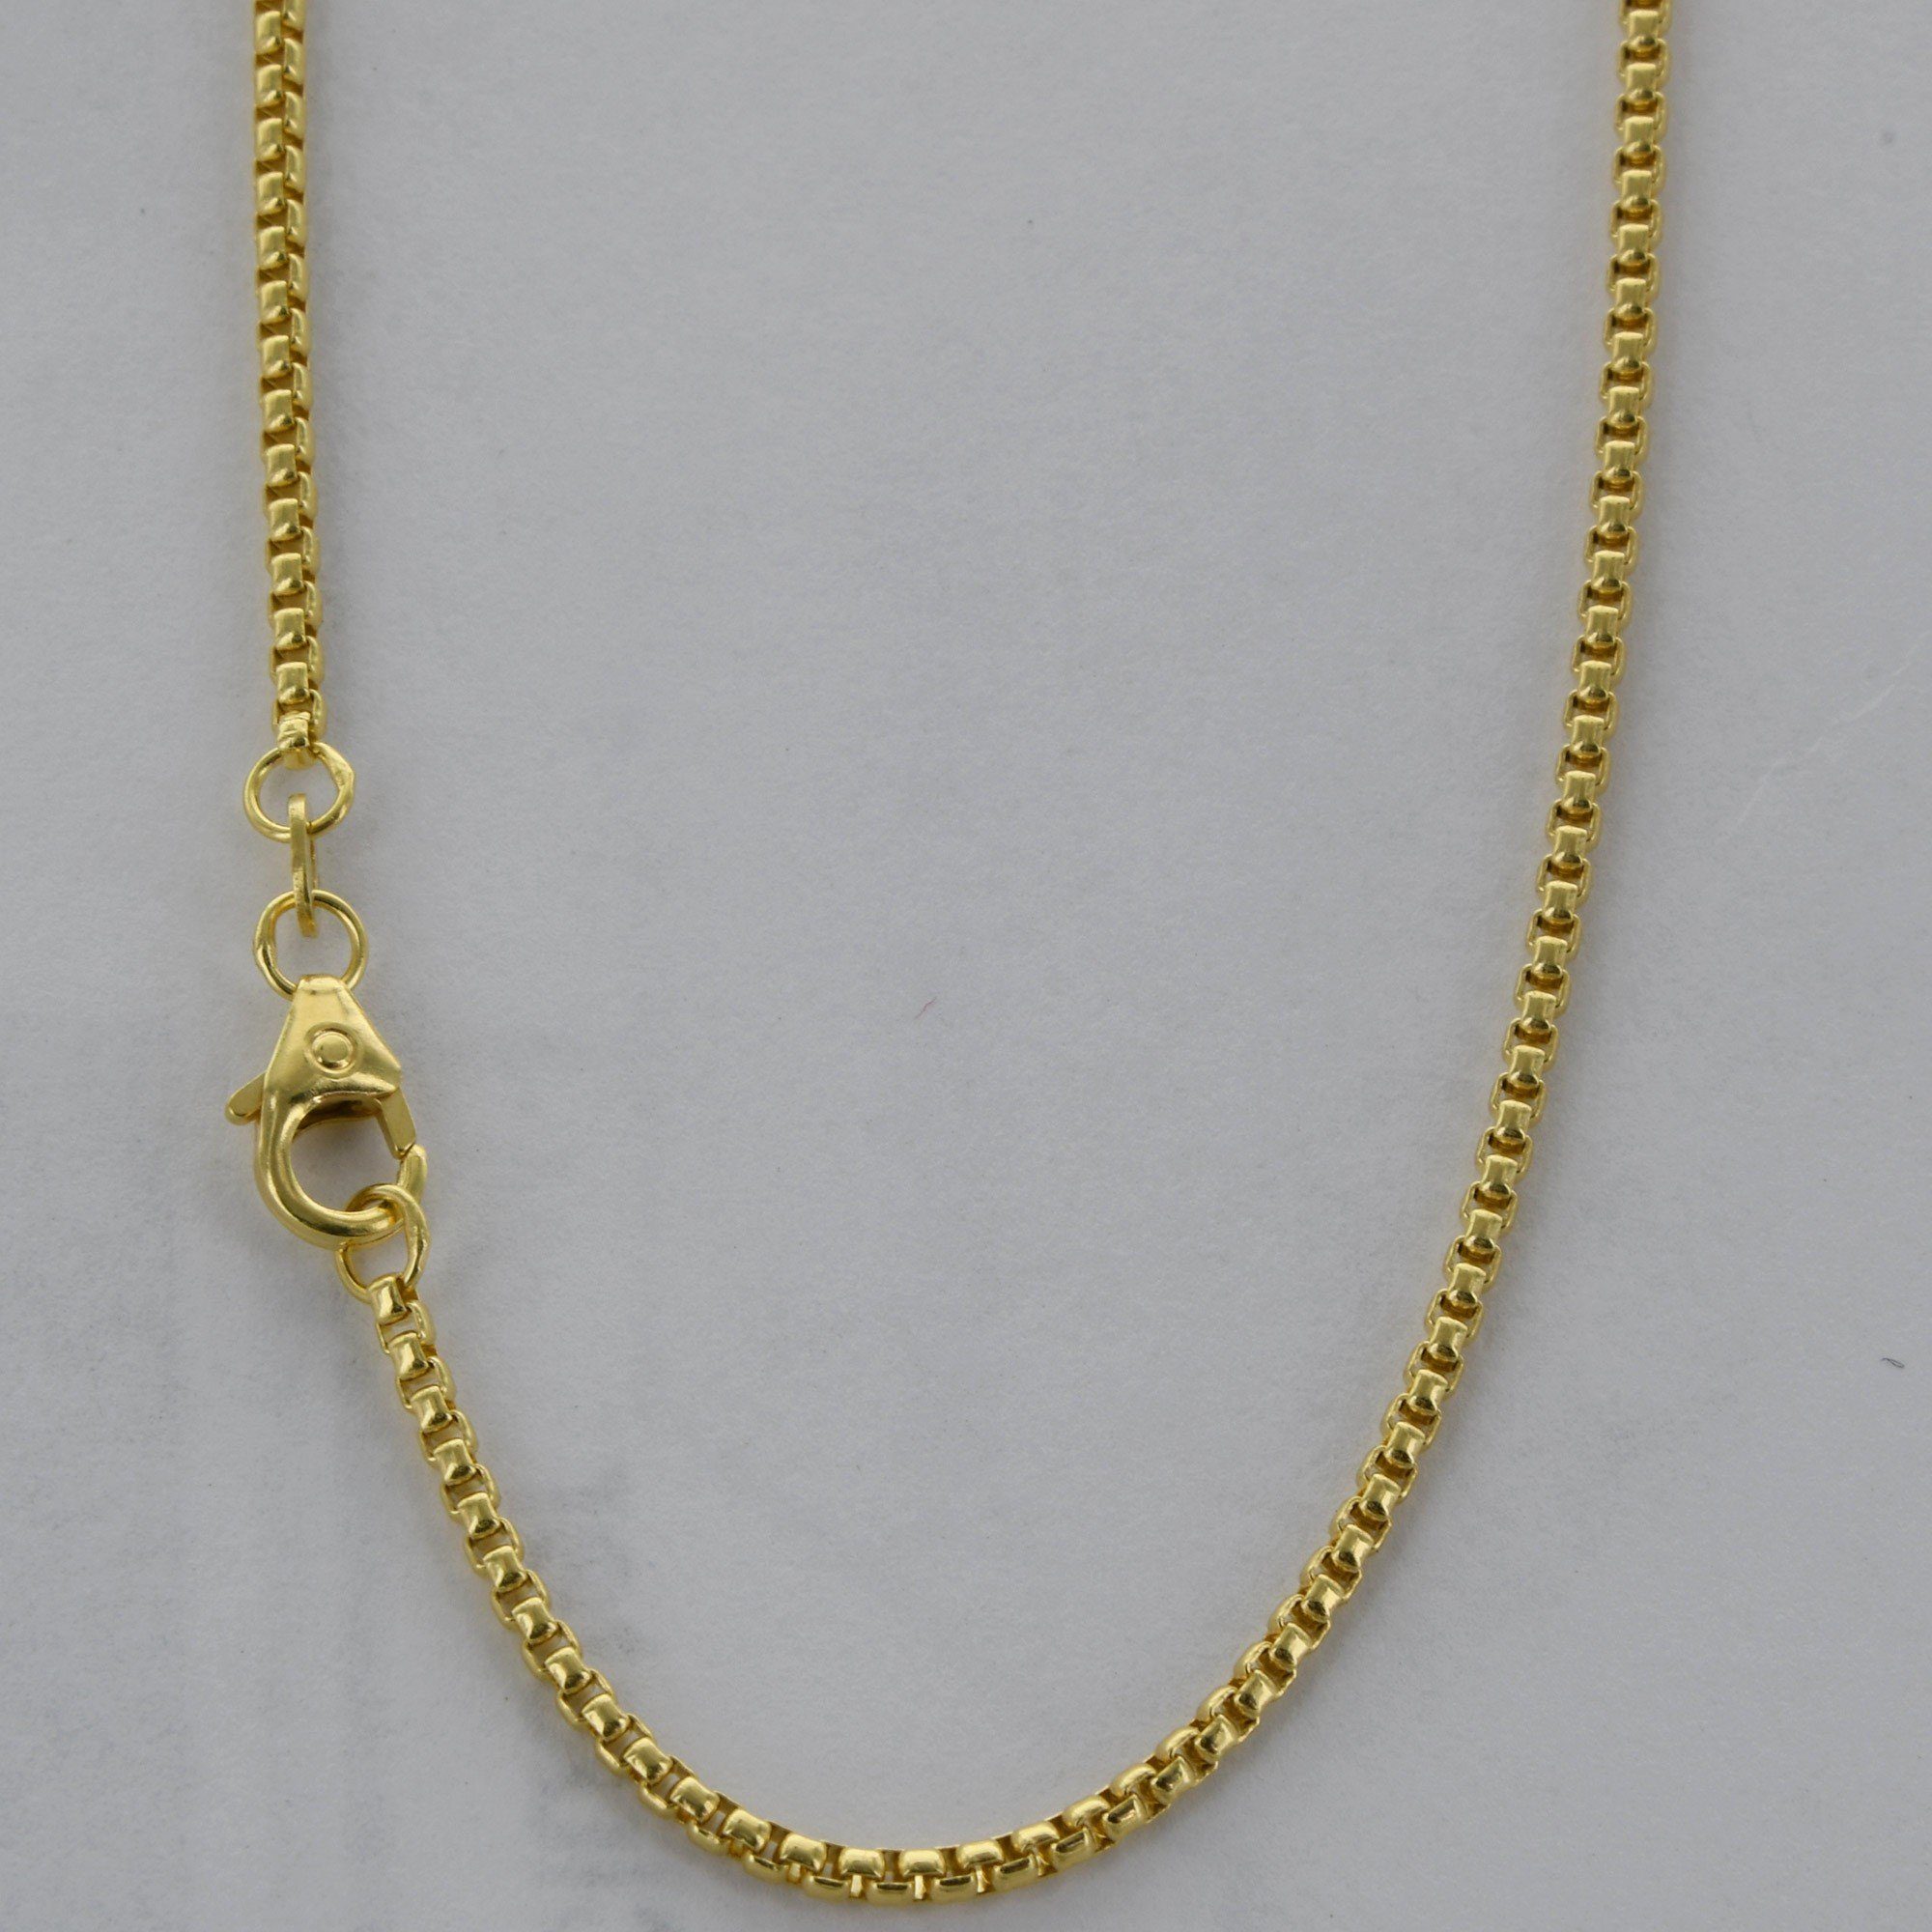 Made in Germany HOPLO Goldkette,